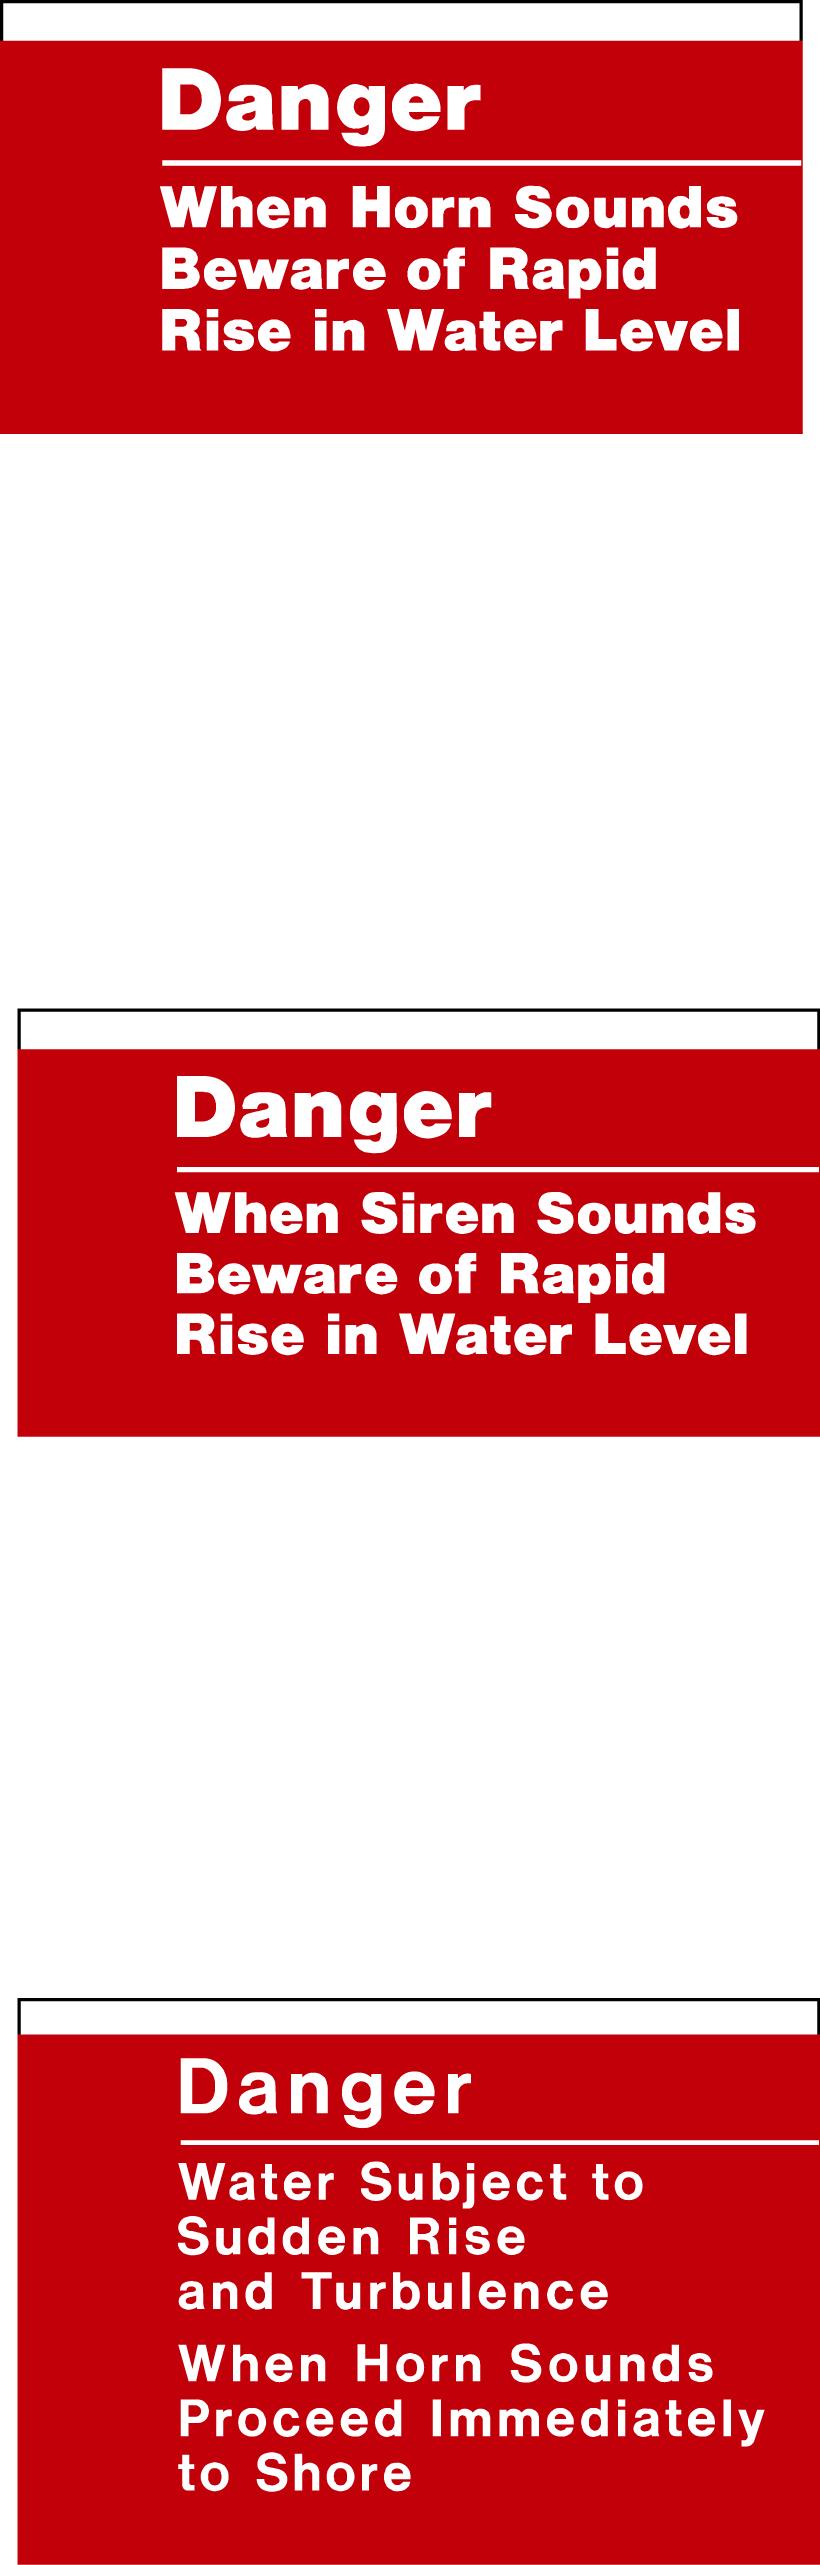 Danger: uditory or Visual al s (For Use With Existing Systems Only) EP 31016a The function of the signs illustrated below (and on the following page) is to warn project visitors about hazards at a